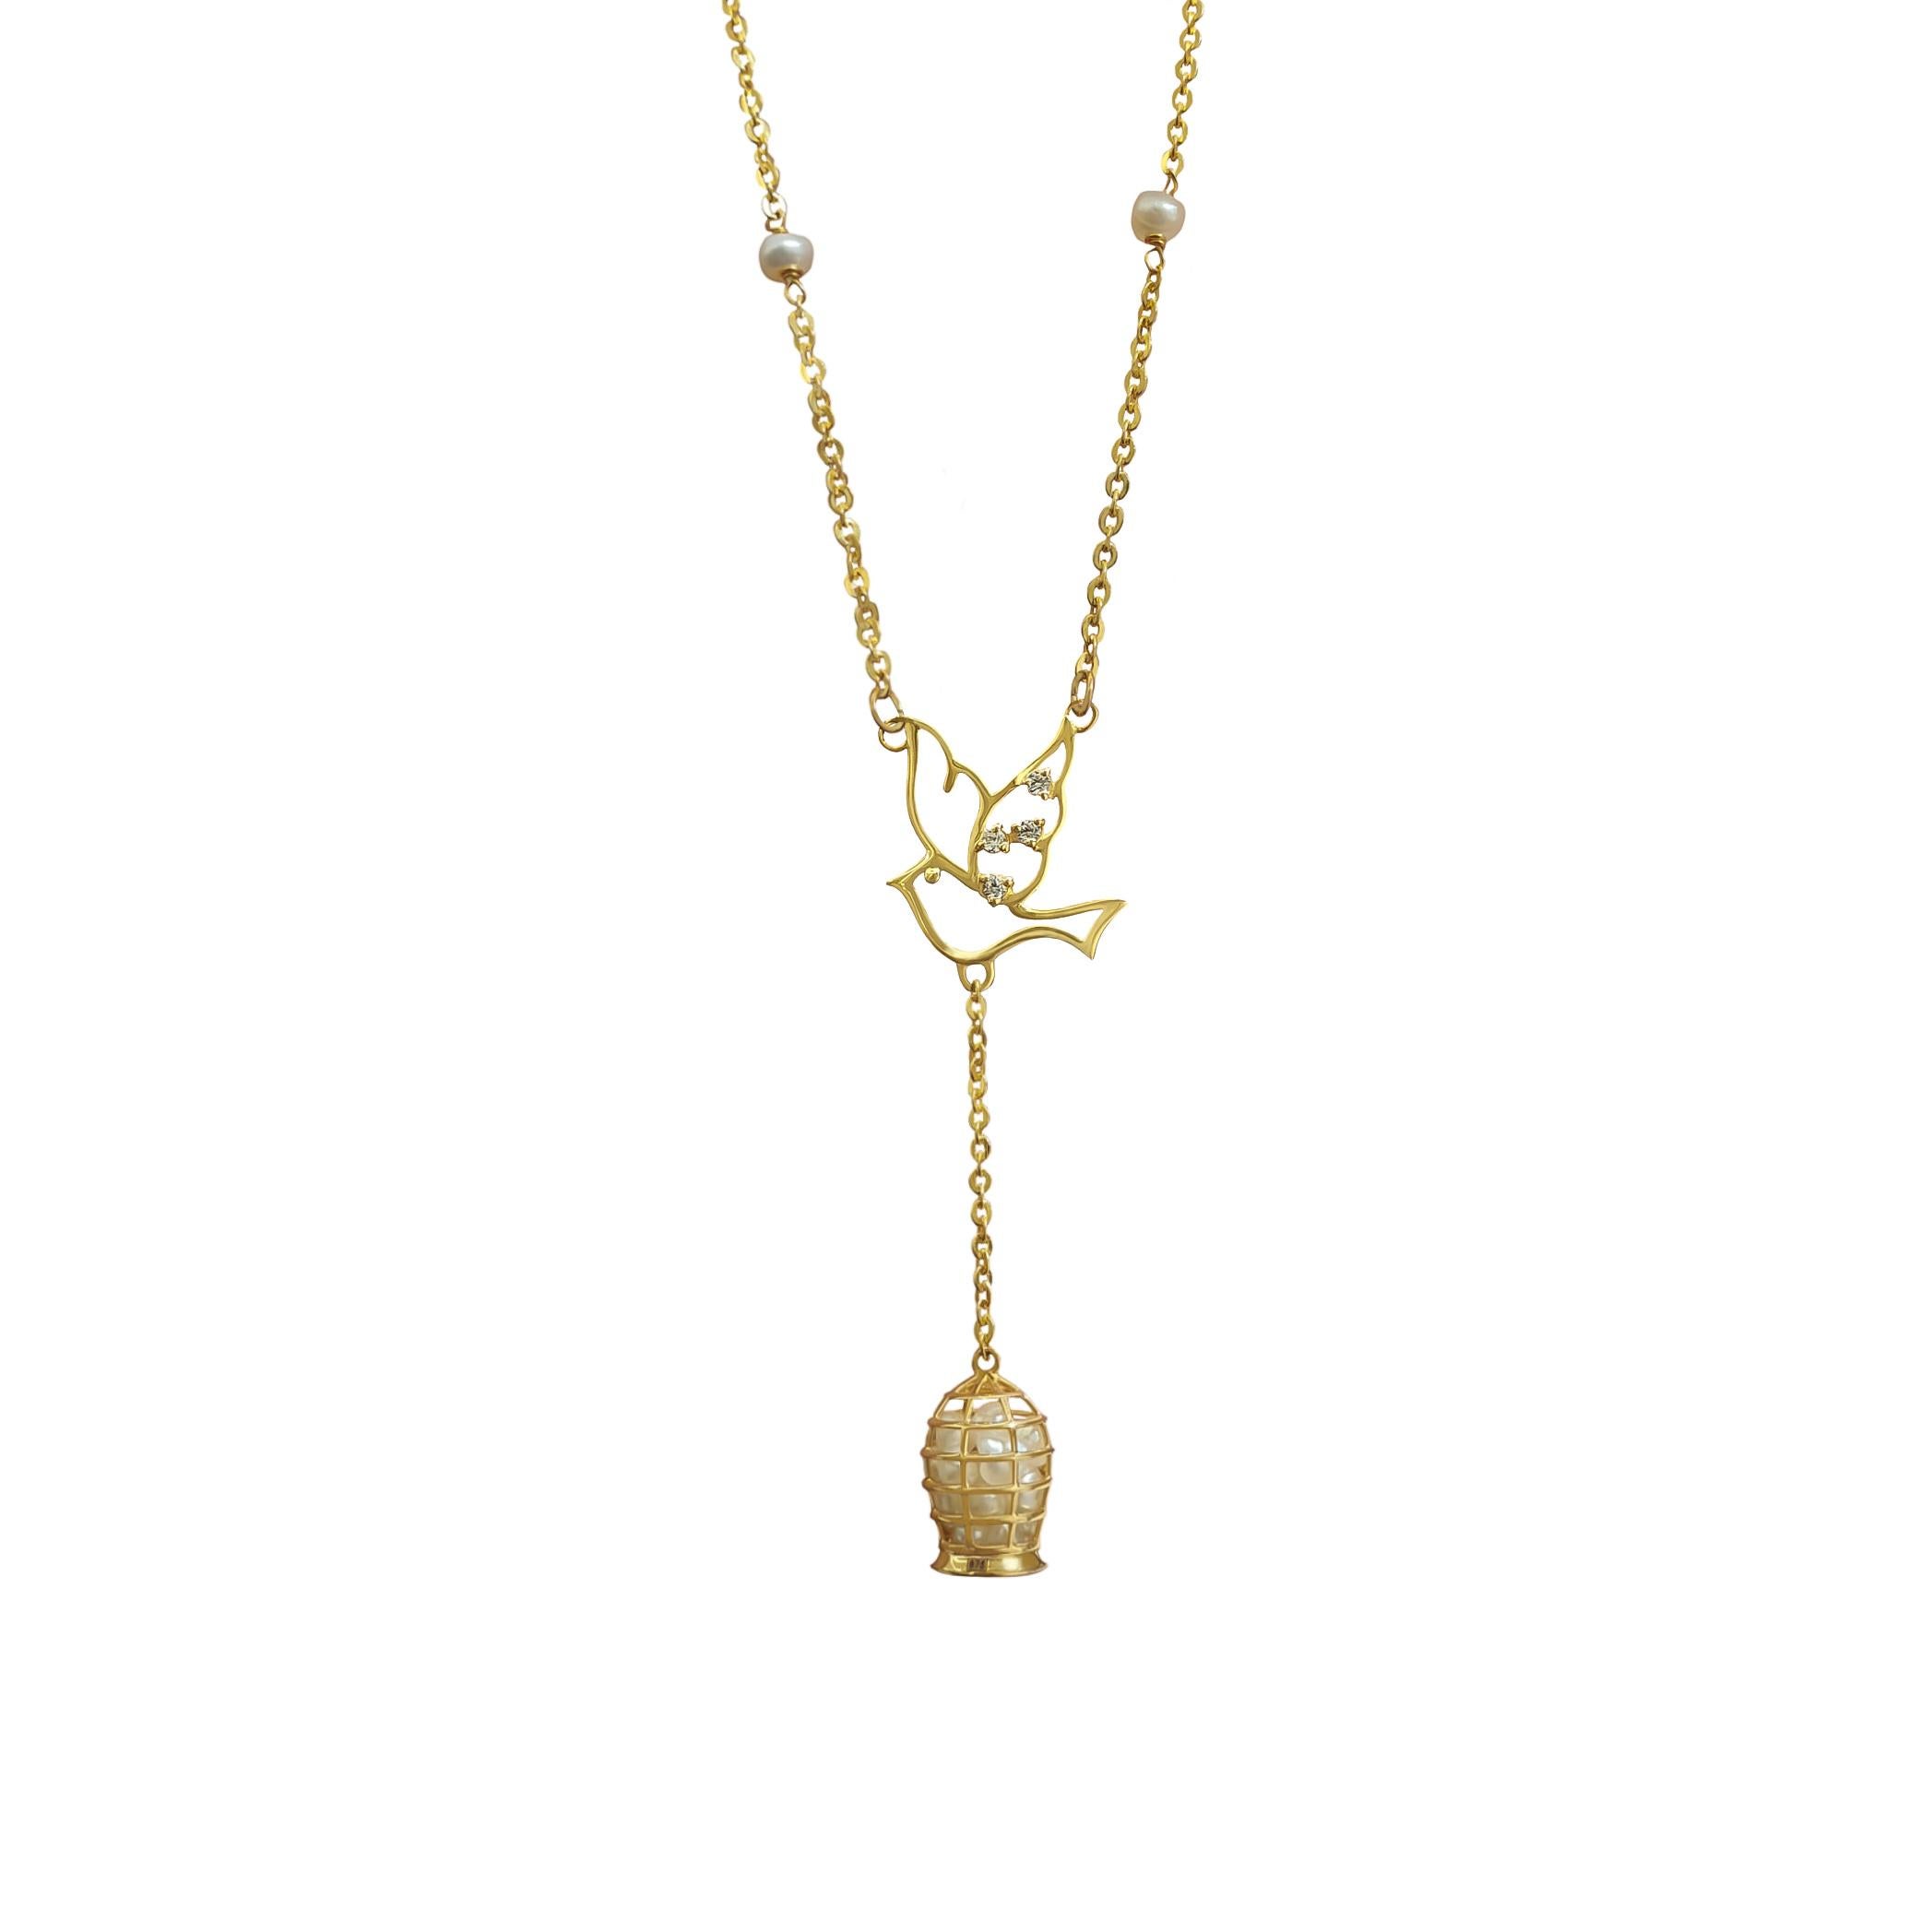 Luck of pearls Necklace is crafted in 22k Yellow Gold.
Beautiful one of a kind Piece of Art.

A golden Dove adorned with natural Diamonds carrying the Cage of Luck filled with Natural Bahraini Pearls. The piece is finished with a 22k gold chain with